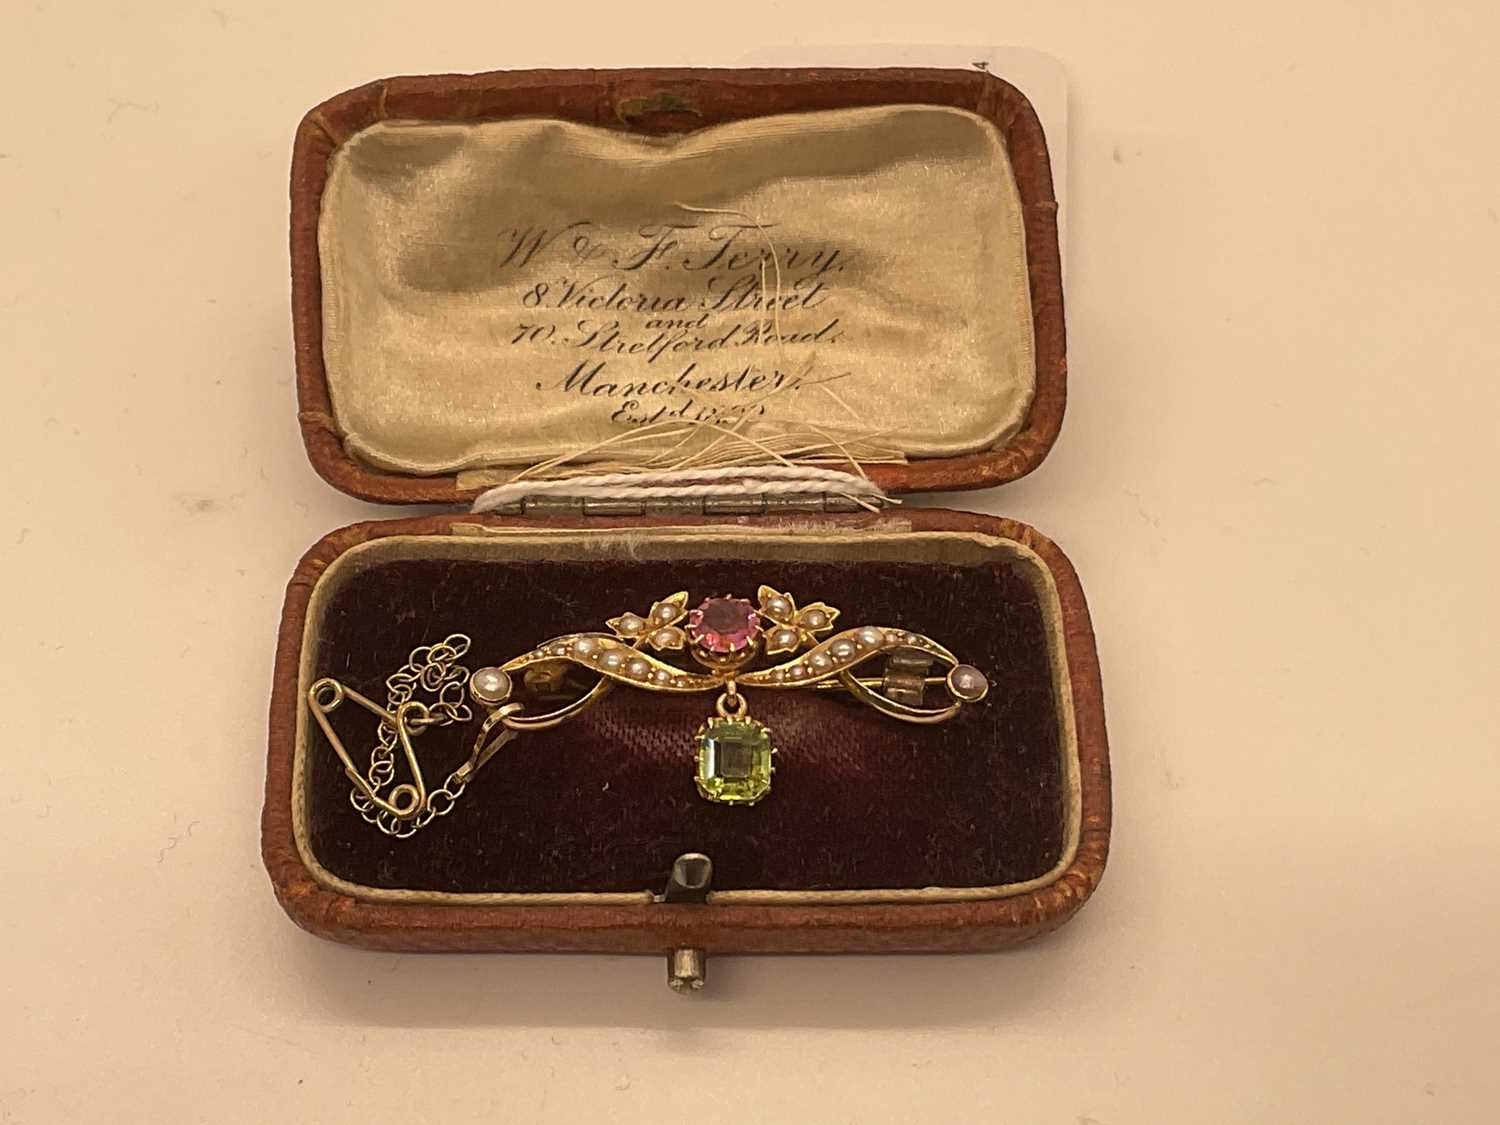 Edwardian pink tourmaline, peridot and seed pearl brooch in box - Image 6 of 6